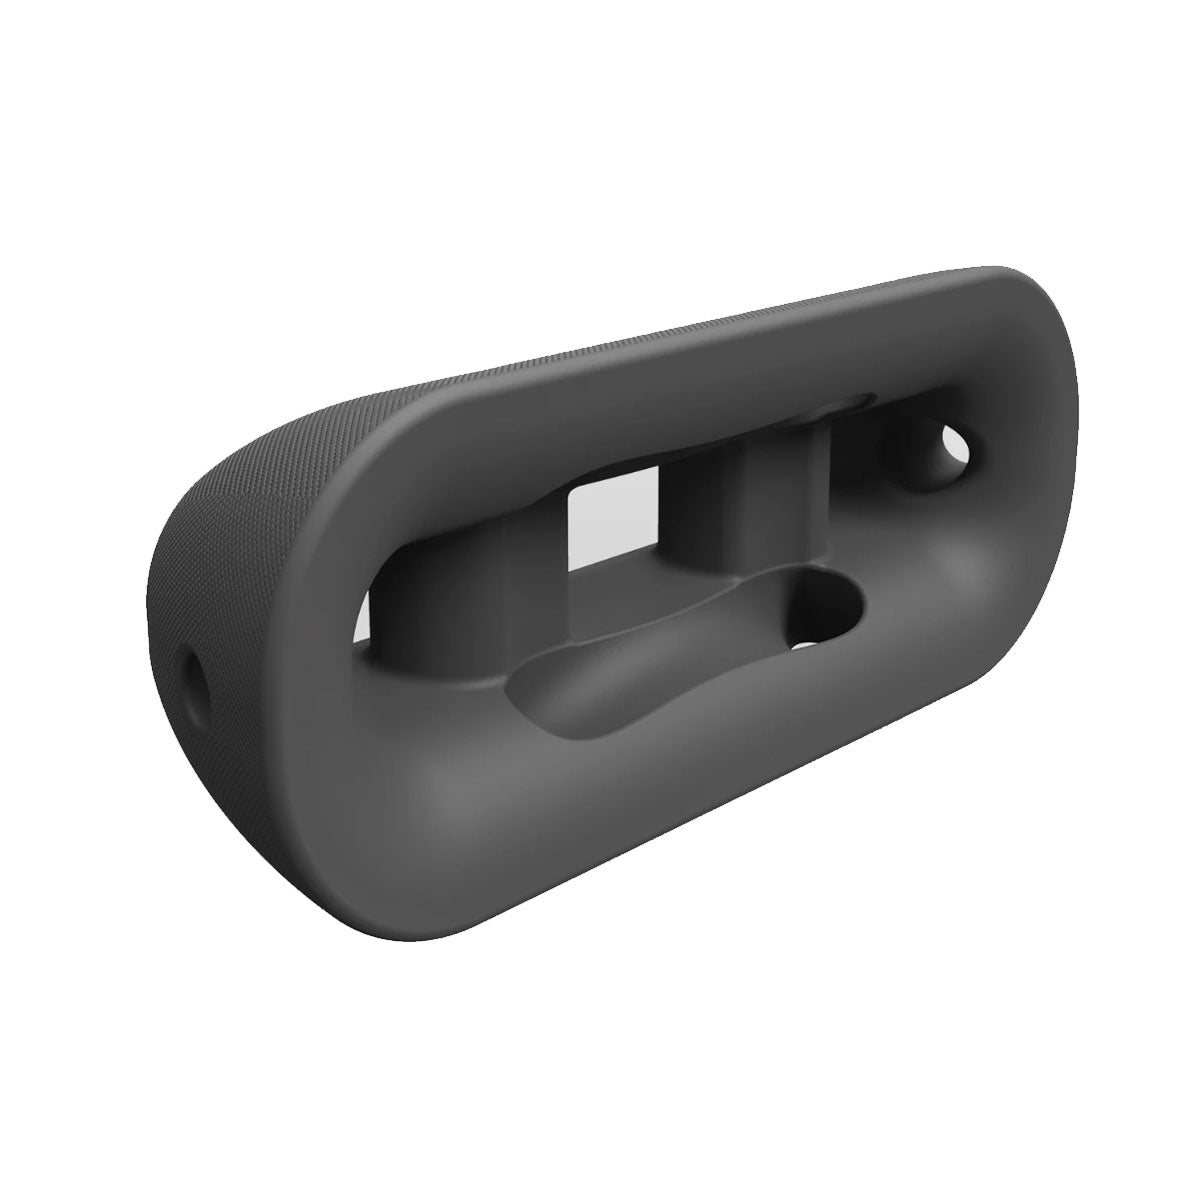 A black MISSION plastic handle with a pyramid profile shape on a white background.